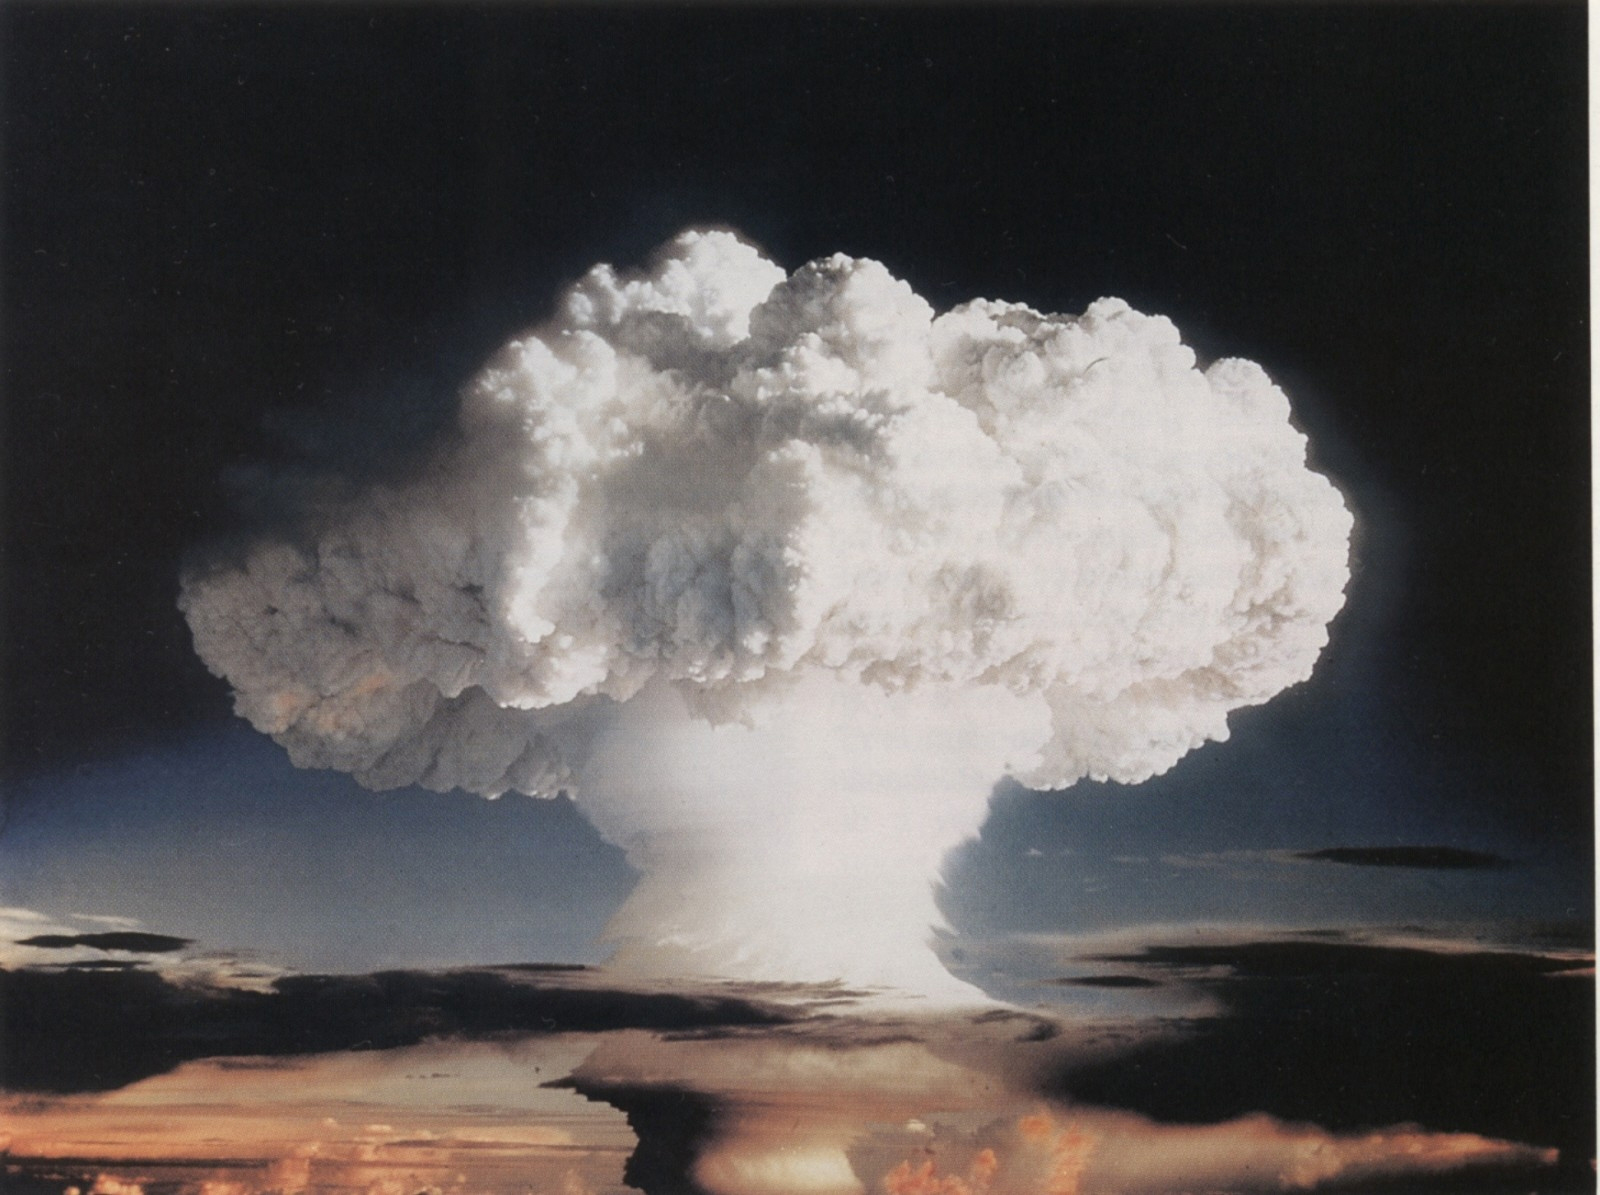 Fig. 3: Unknown photographer. 1952. «Ivy Mike Mushroom Cloud» [Photograph]
